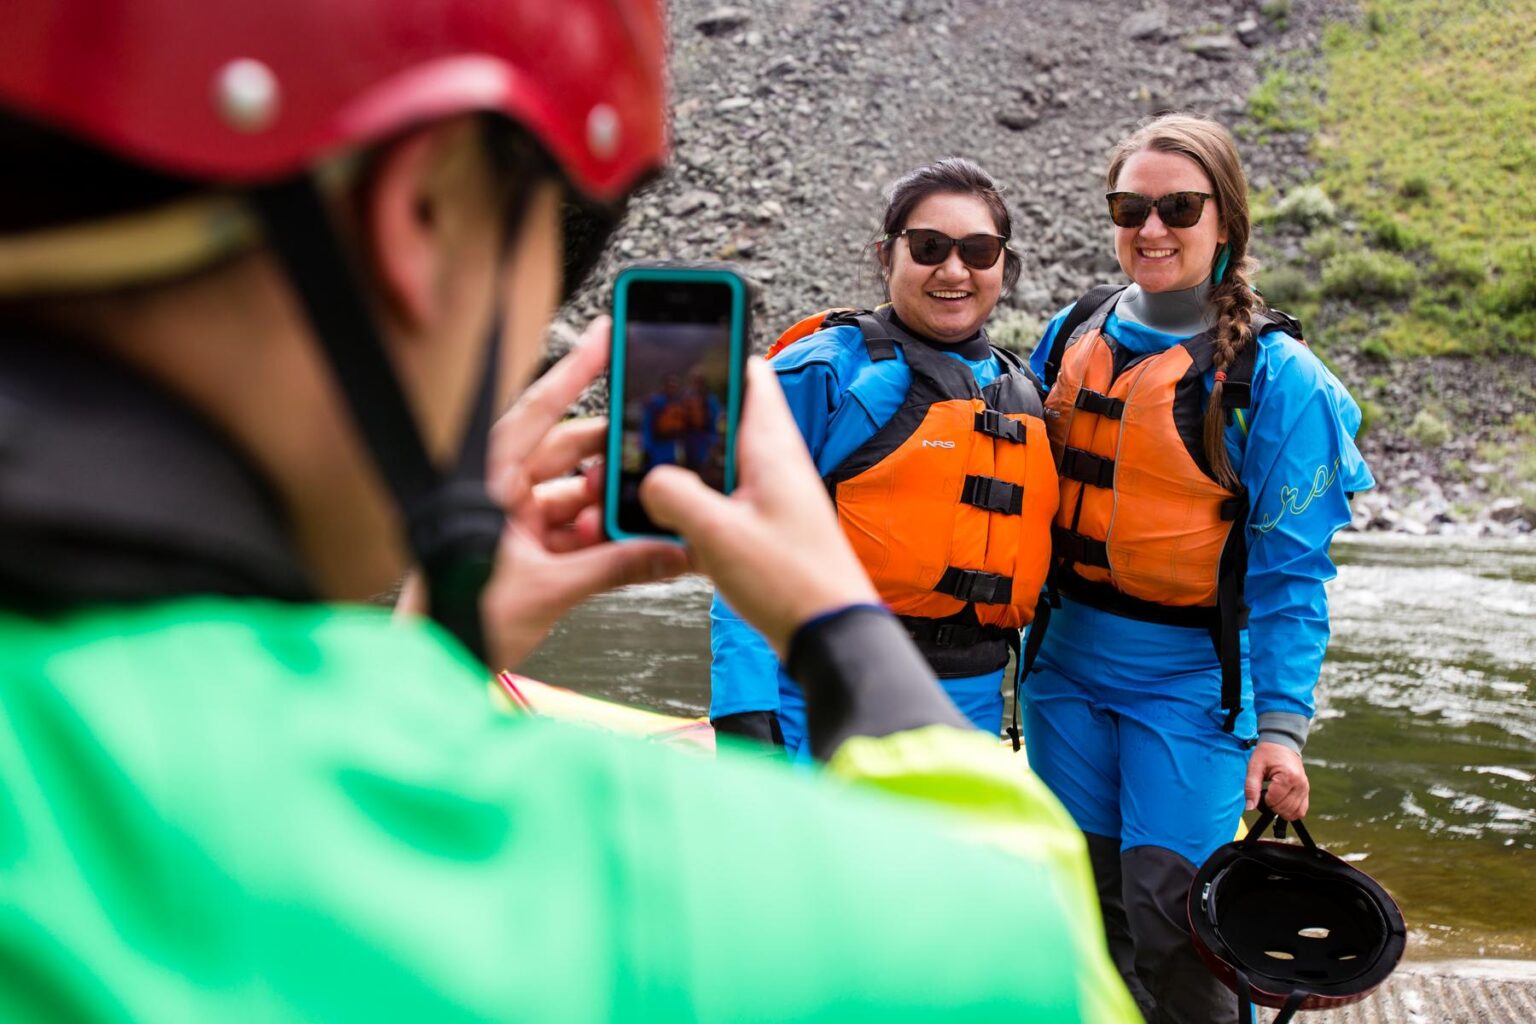 A guide uses a phone to take a picture of two guests on an OARS trip.